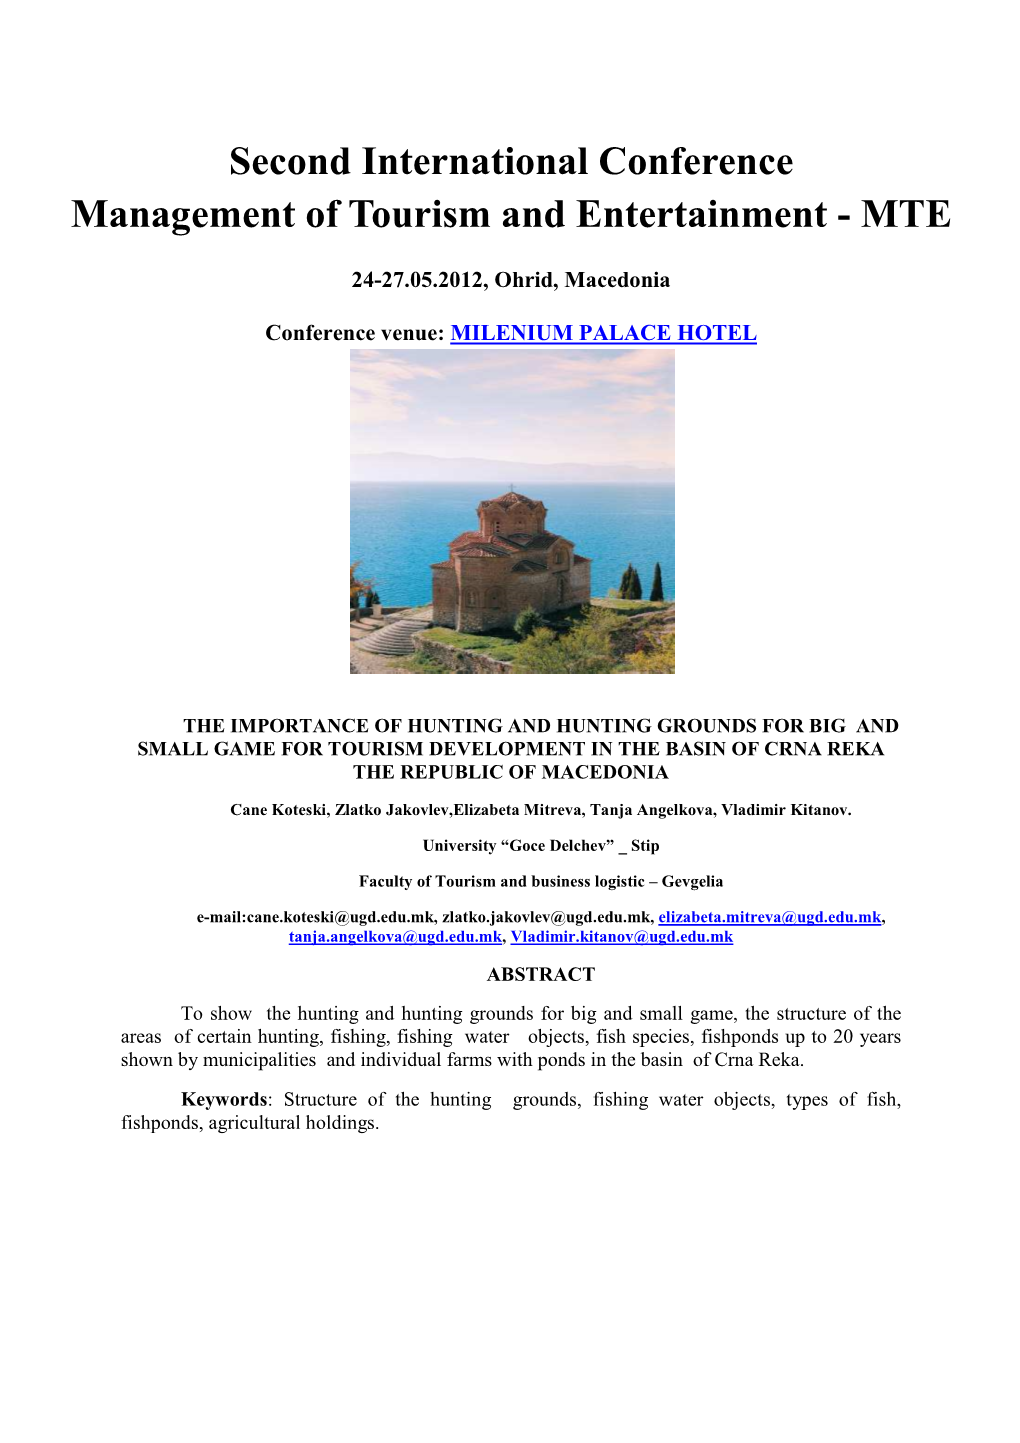 Second International Conference Management of Tourism and Entertainment - MTE